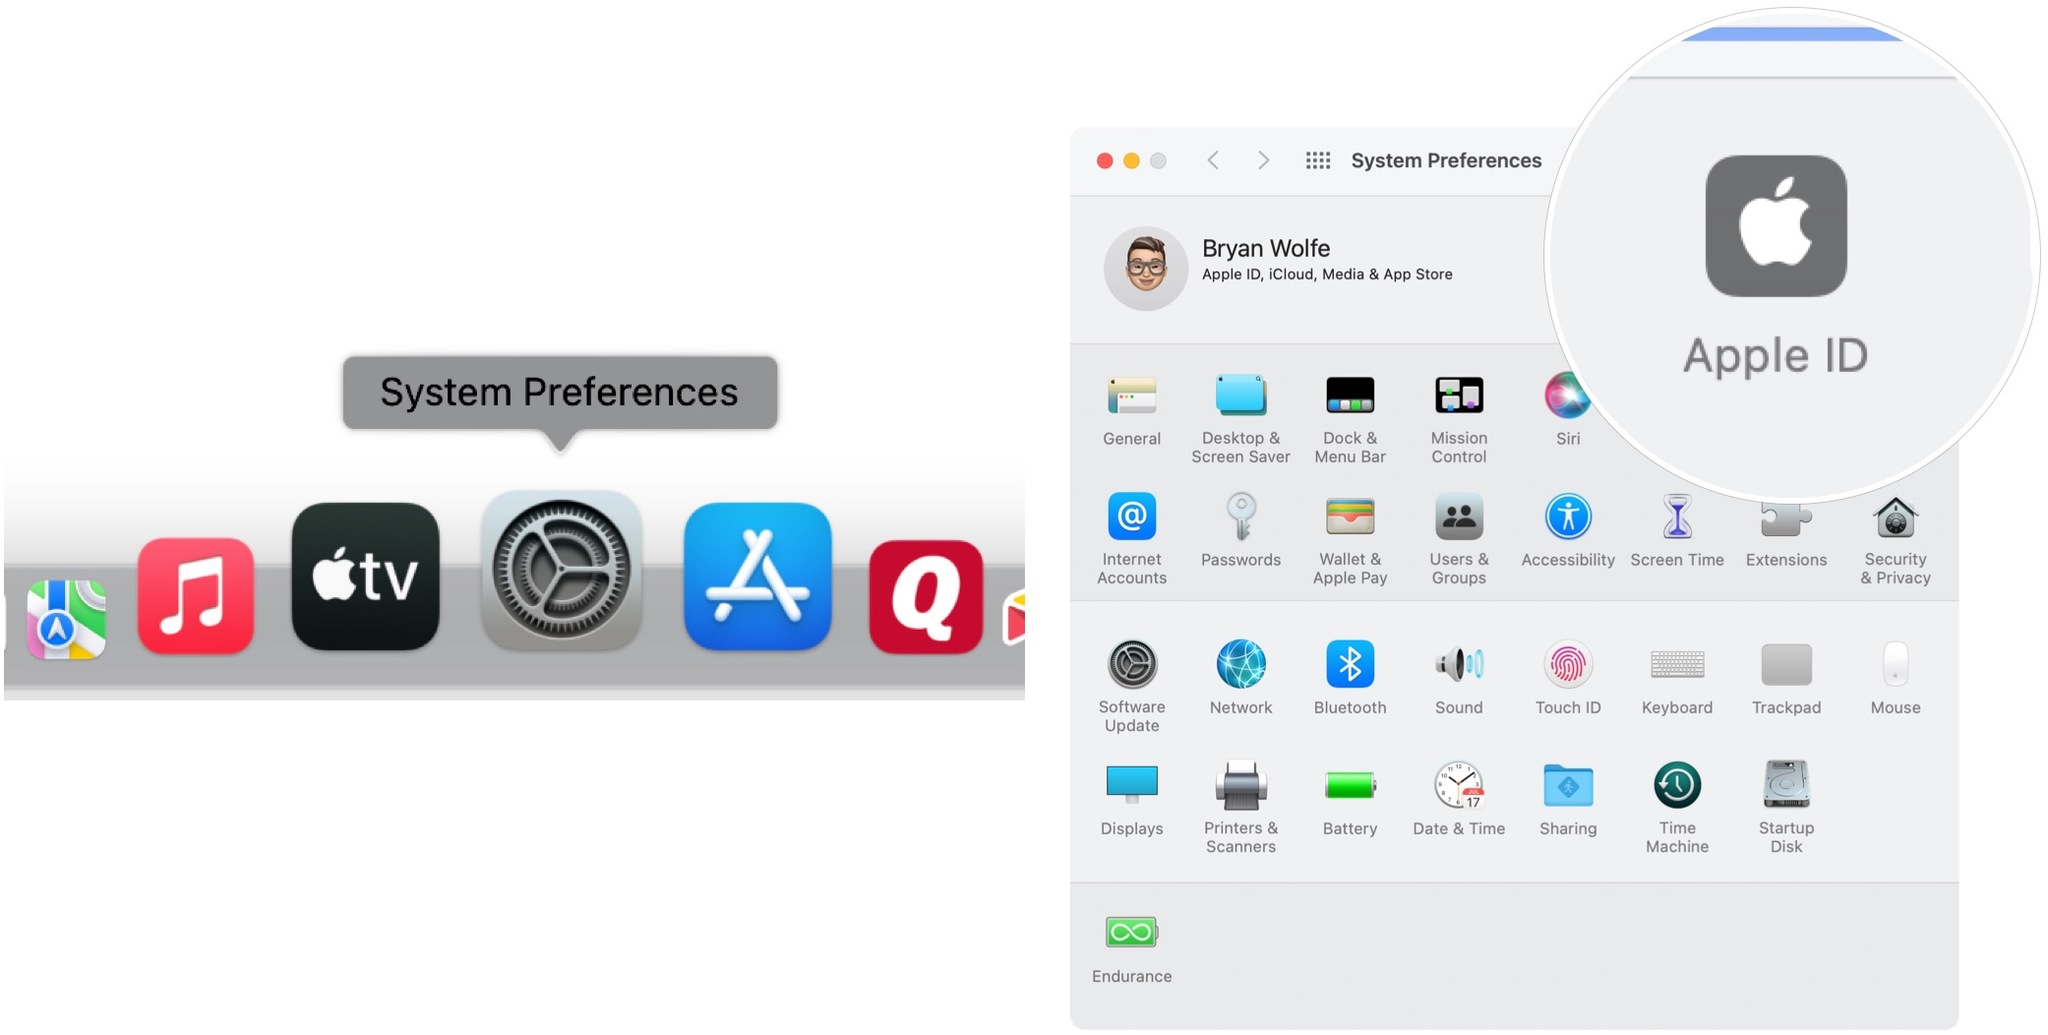 To use Hide My Email on Mac, choose System Preferences, then select Apple ID.